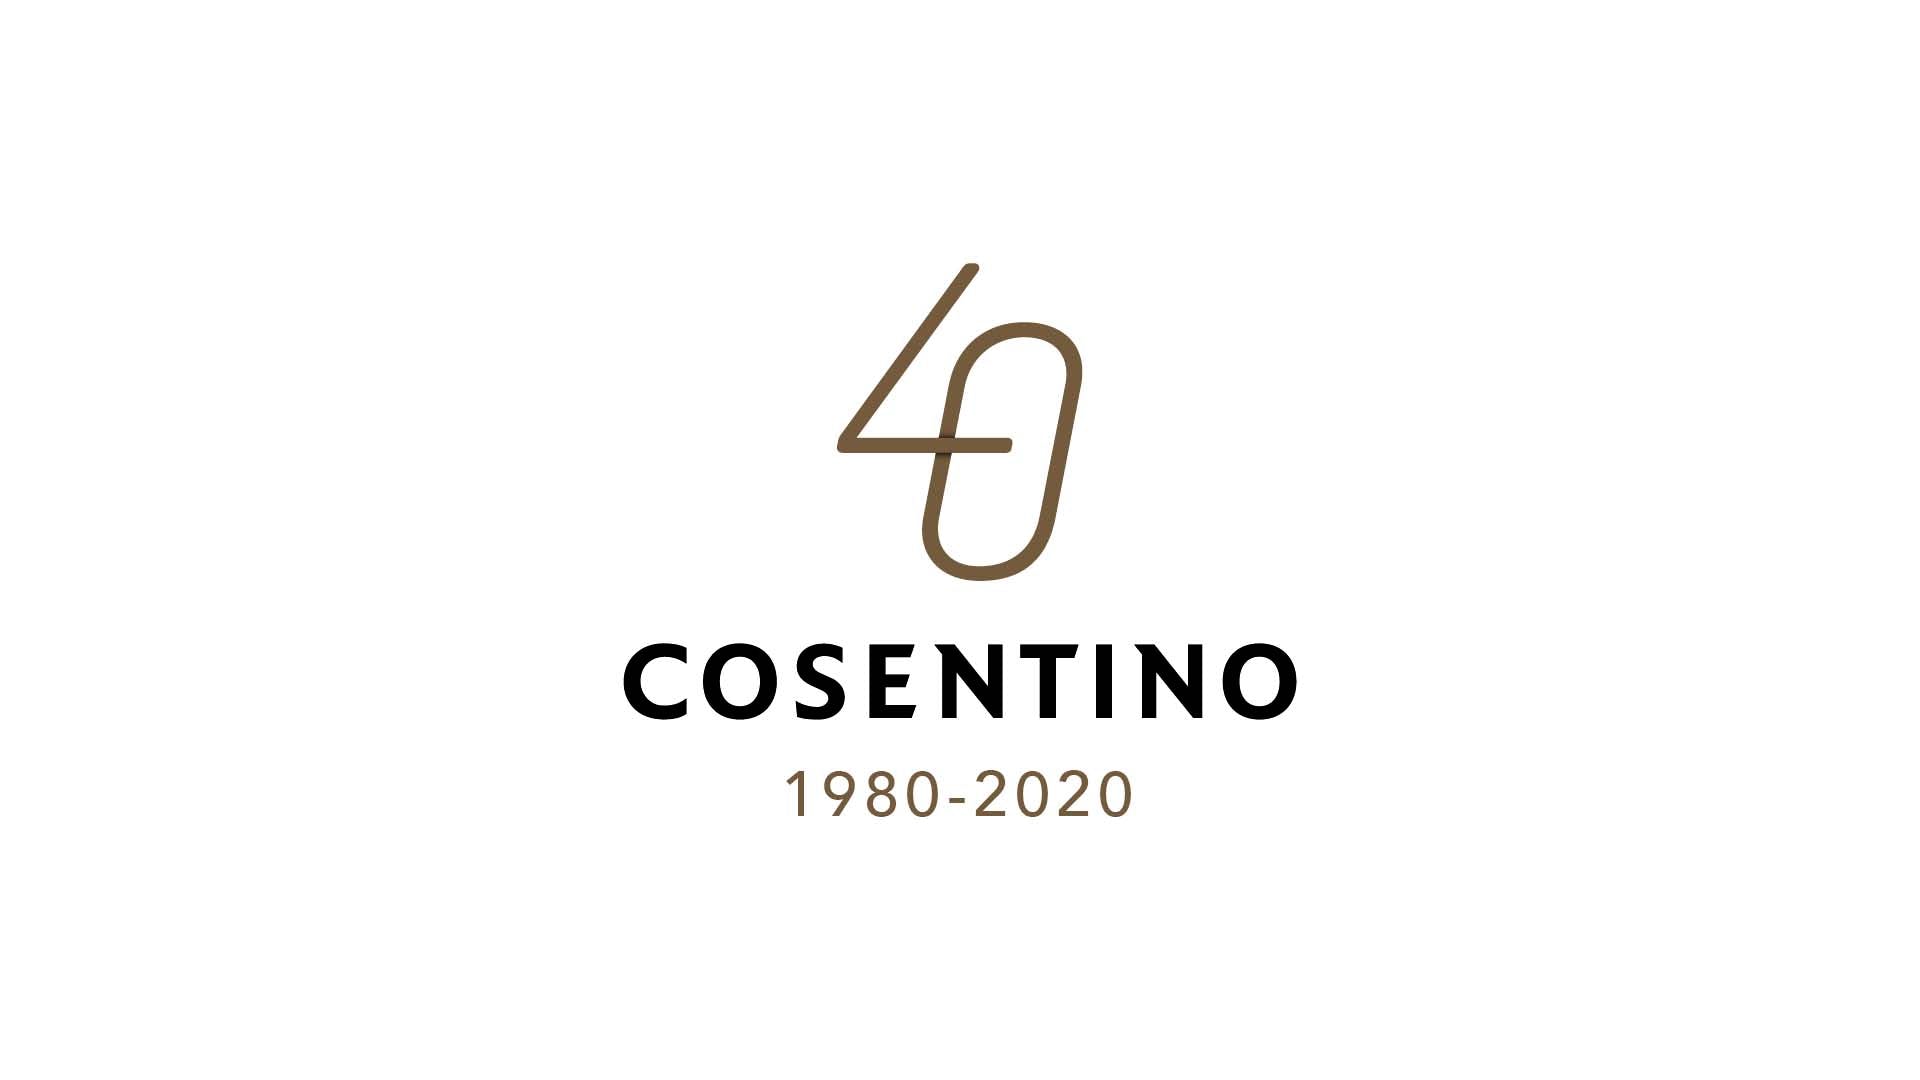 Image of logo cabecera 1 in Cosentino, 40 years of international growth and expansion - Cosentino